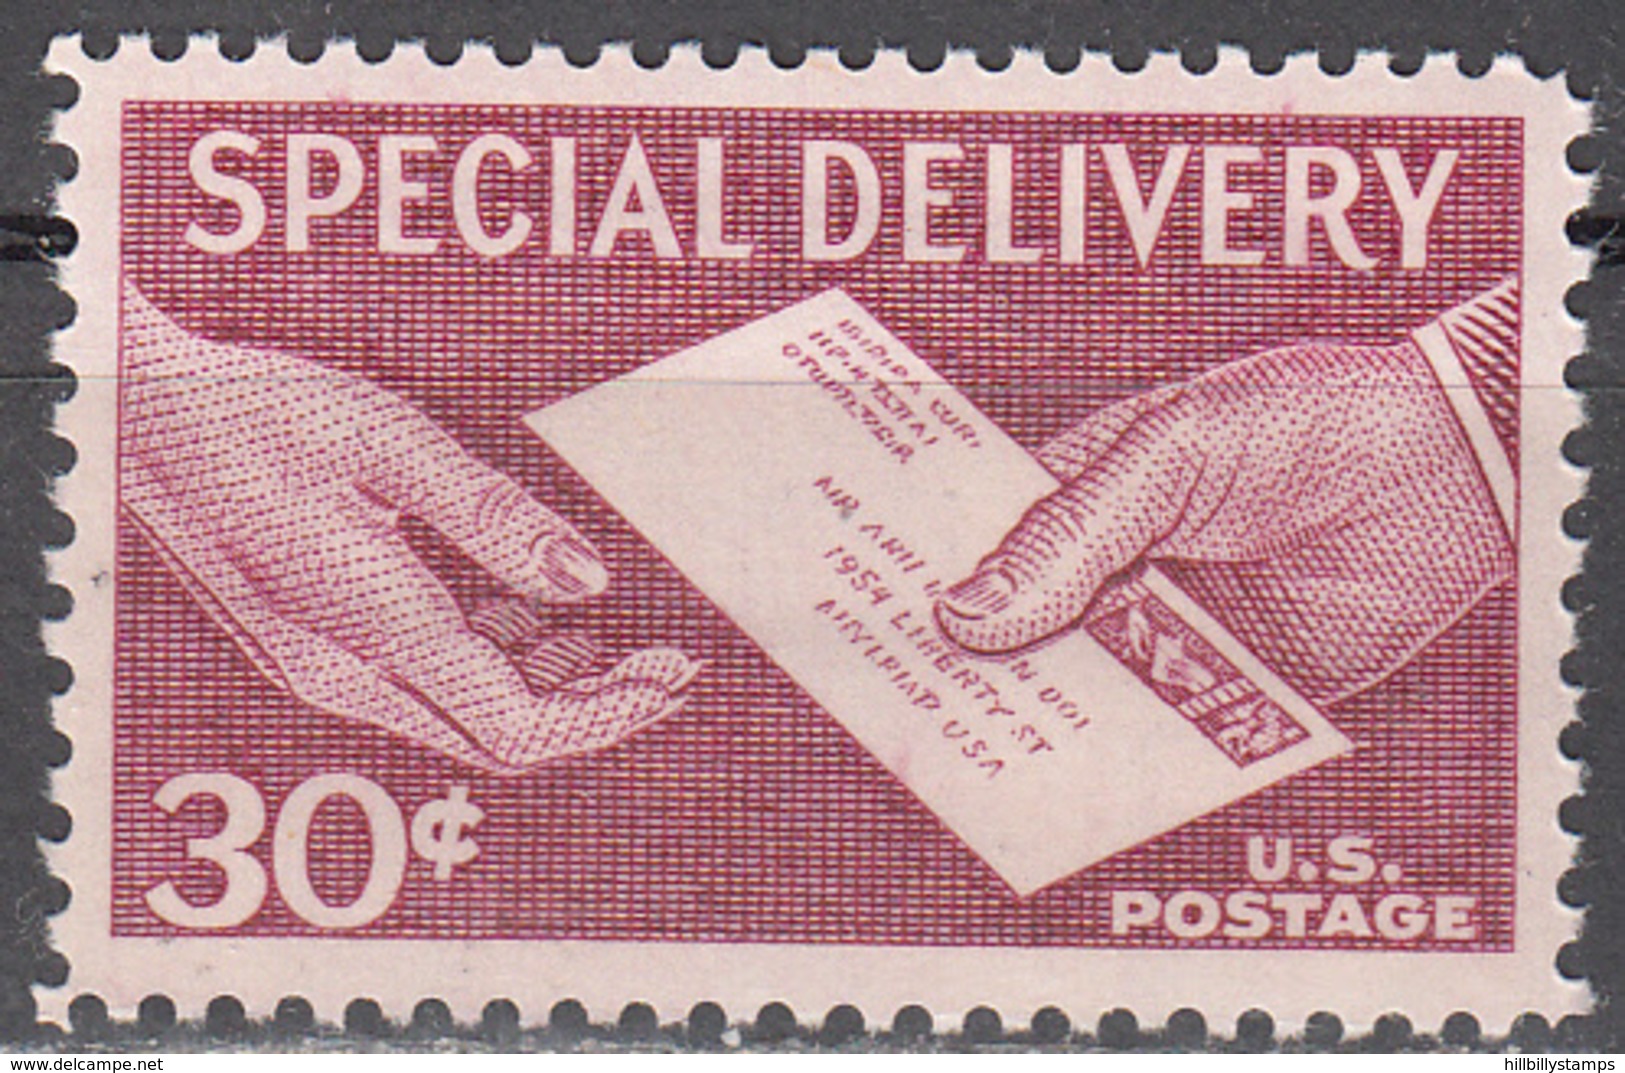 UNITED STATES     SCOTT NO.E21     MNH     YEAR 1957 - Special Delivery, Registration & Certified